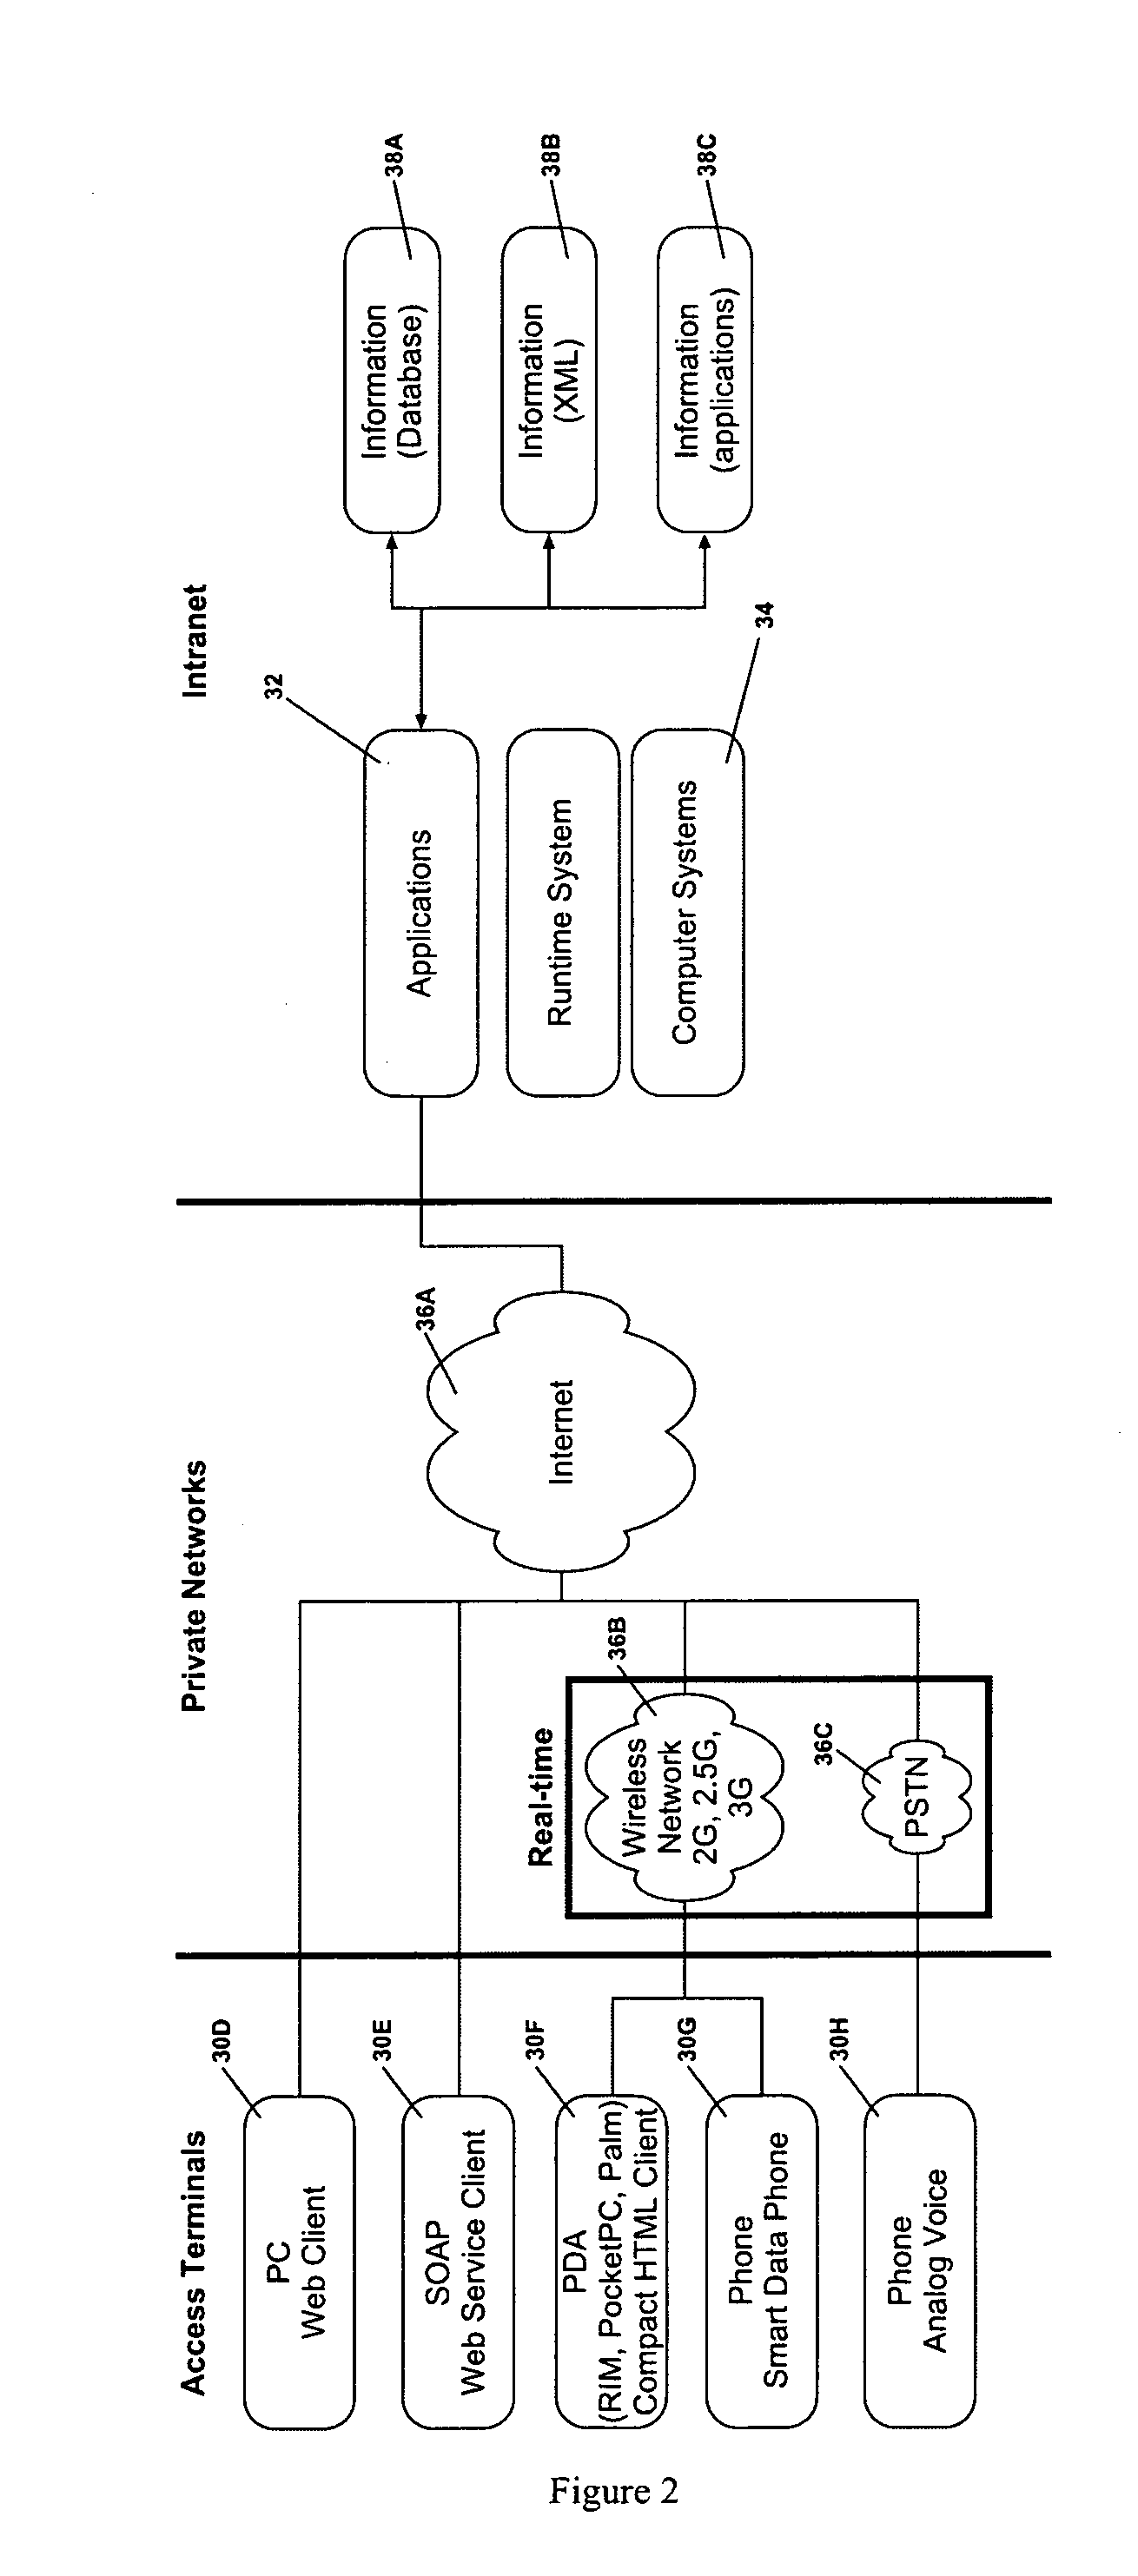 Efficient system and method for running and analyzing multi-channel, multi-modal applications